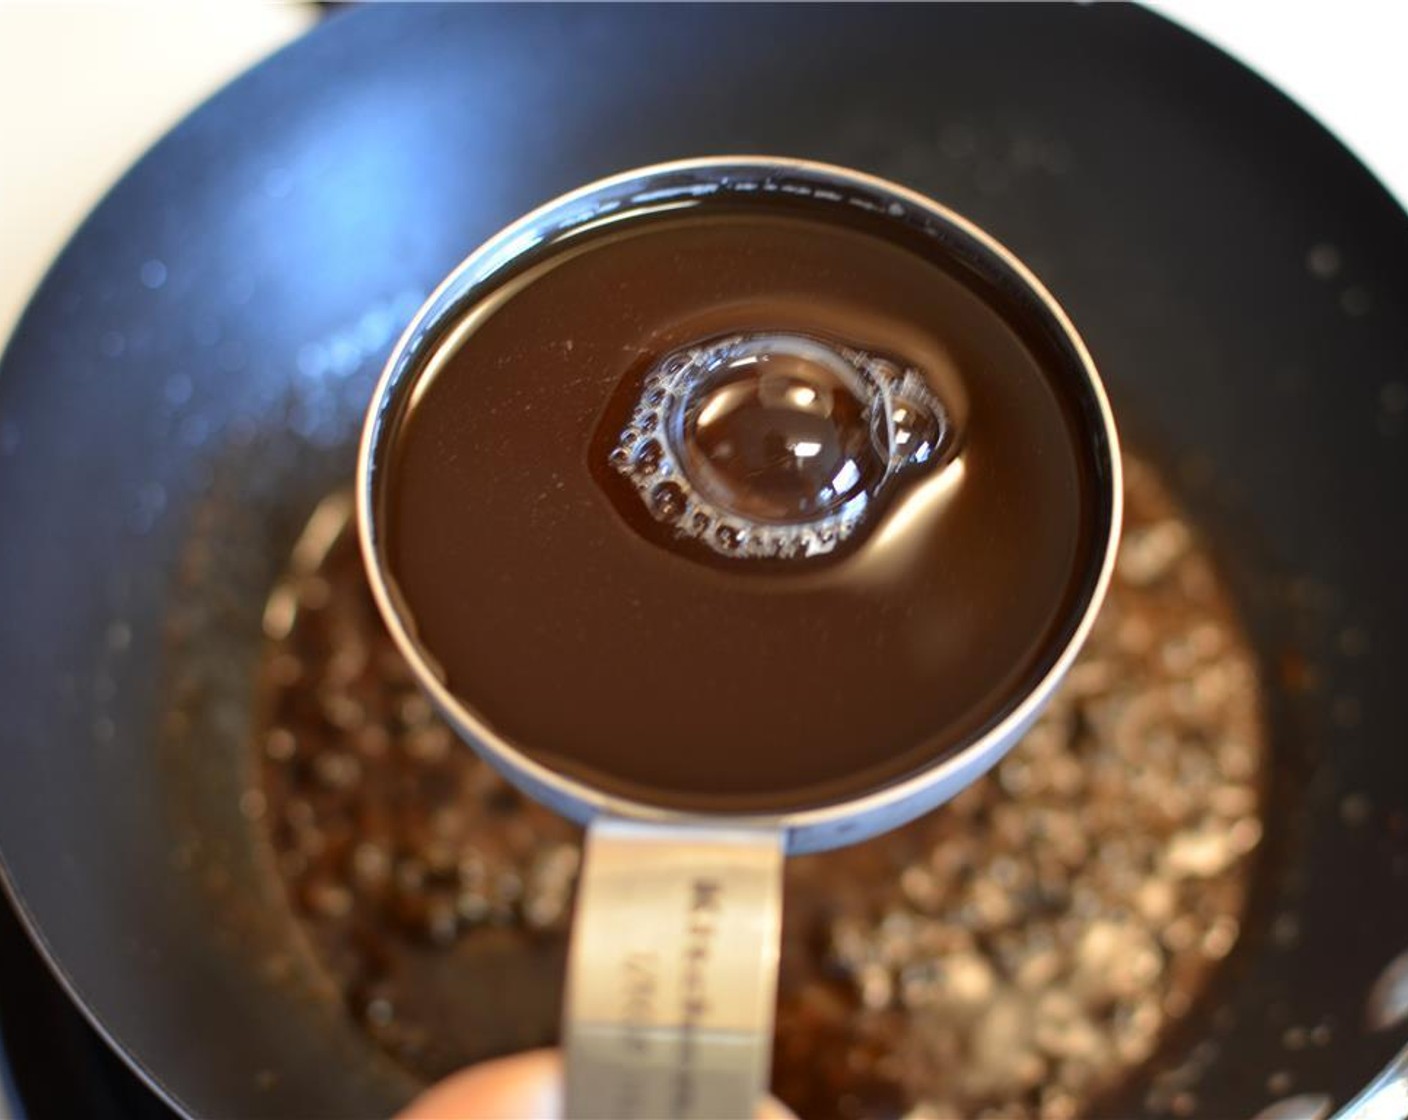 step 7 Add the Balsamic Vinegar (1/4 cup), Brown Sugar (2 Tbsp), and Beef Broth (1/4 cup) and stir to mix everything well.